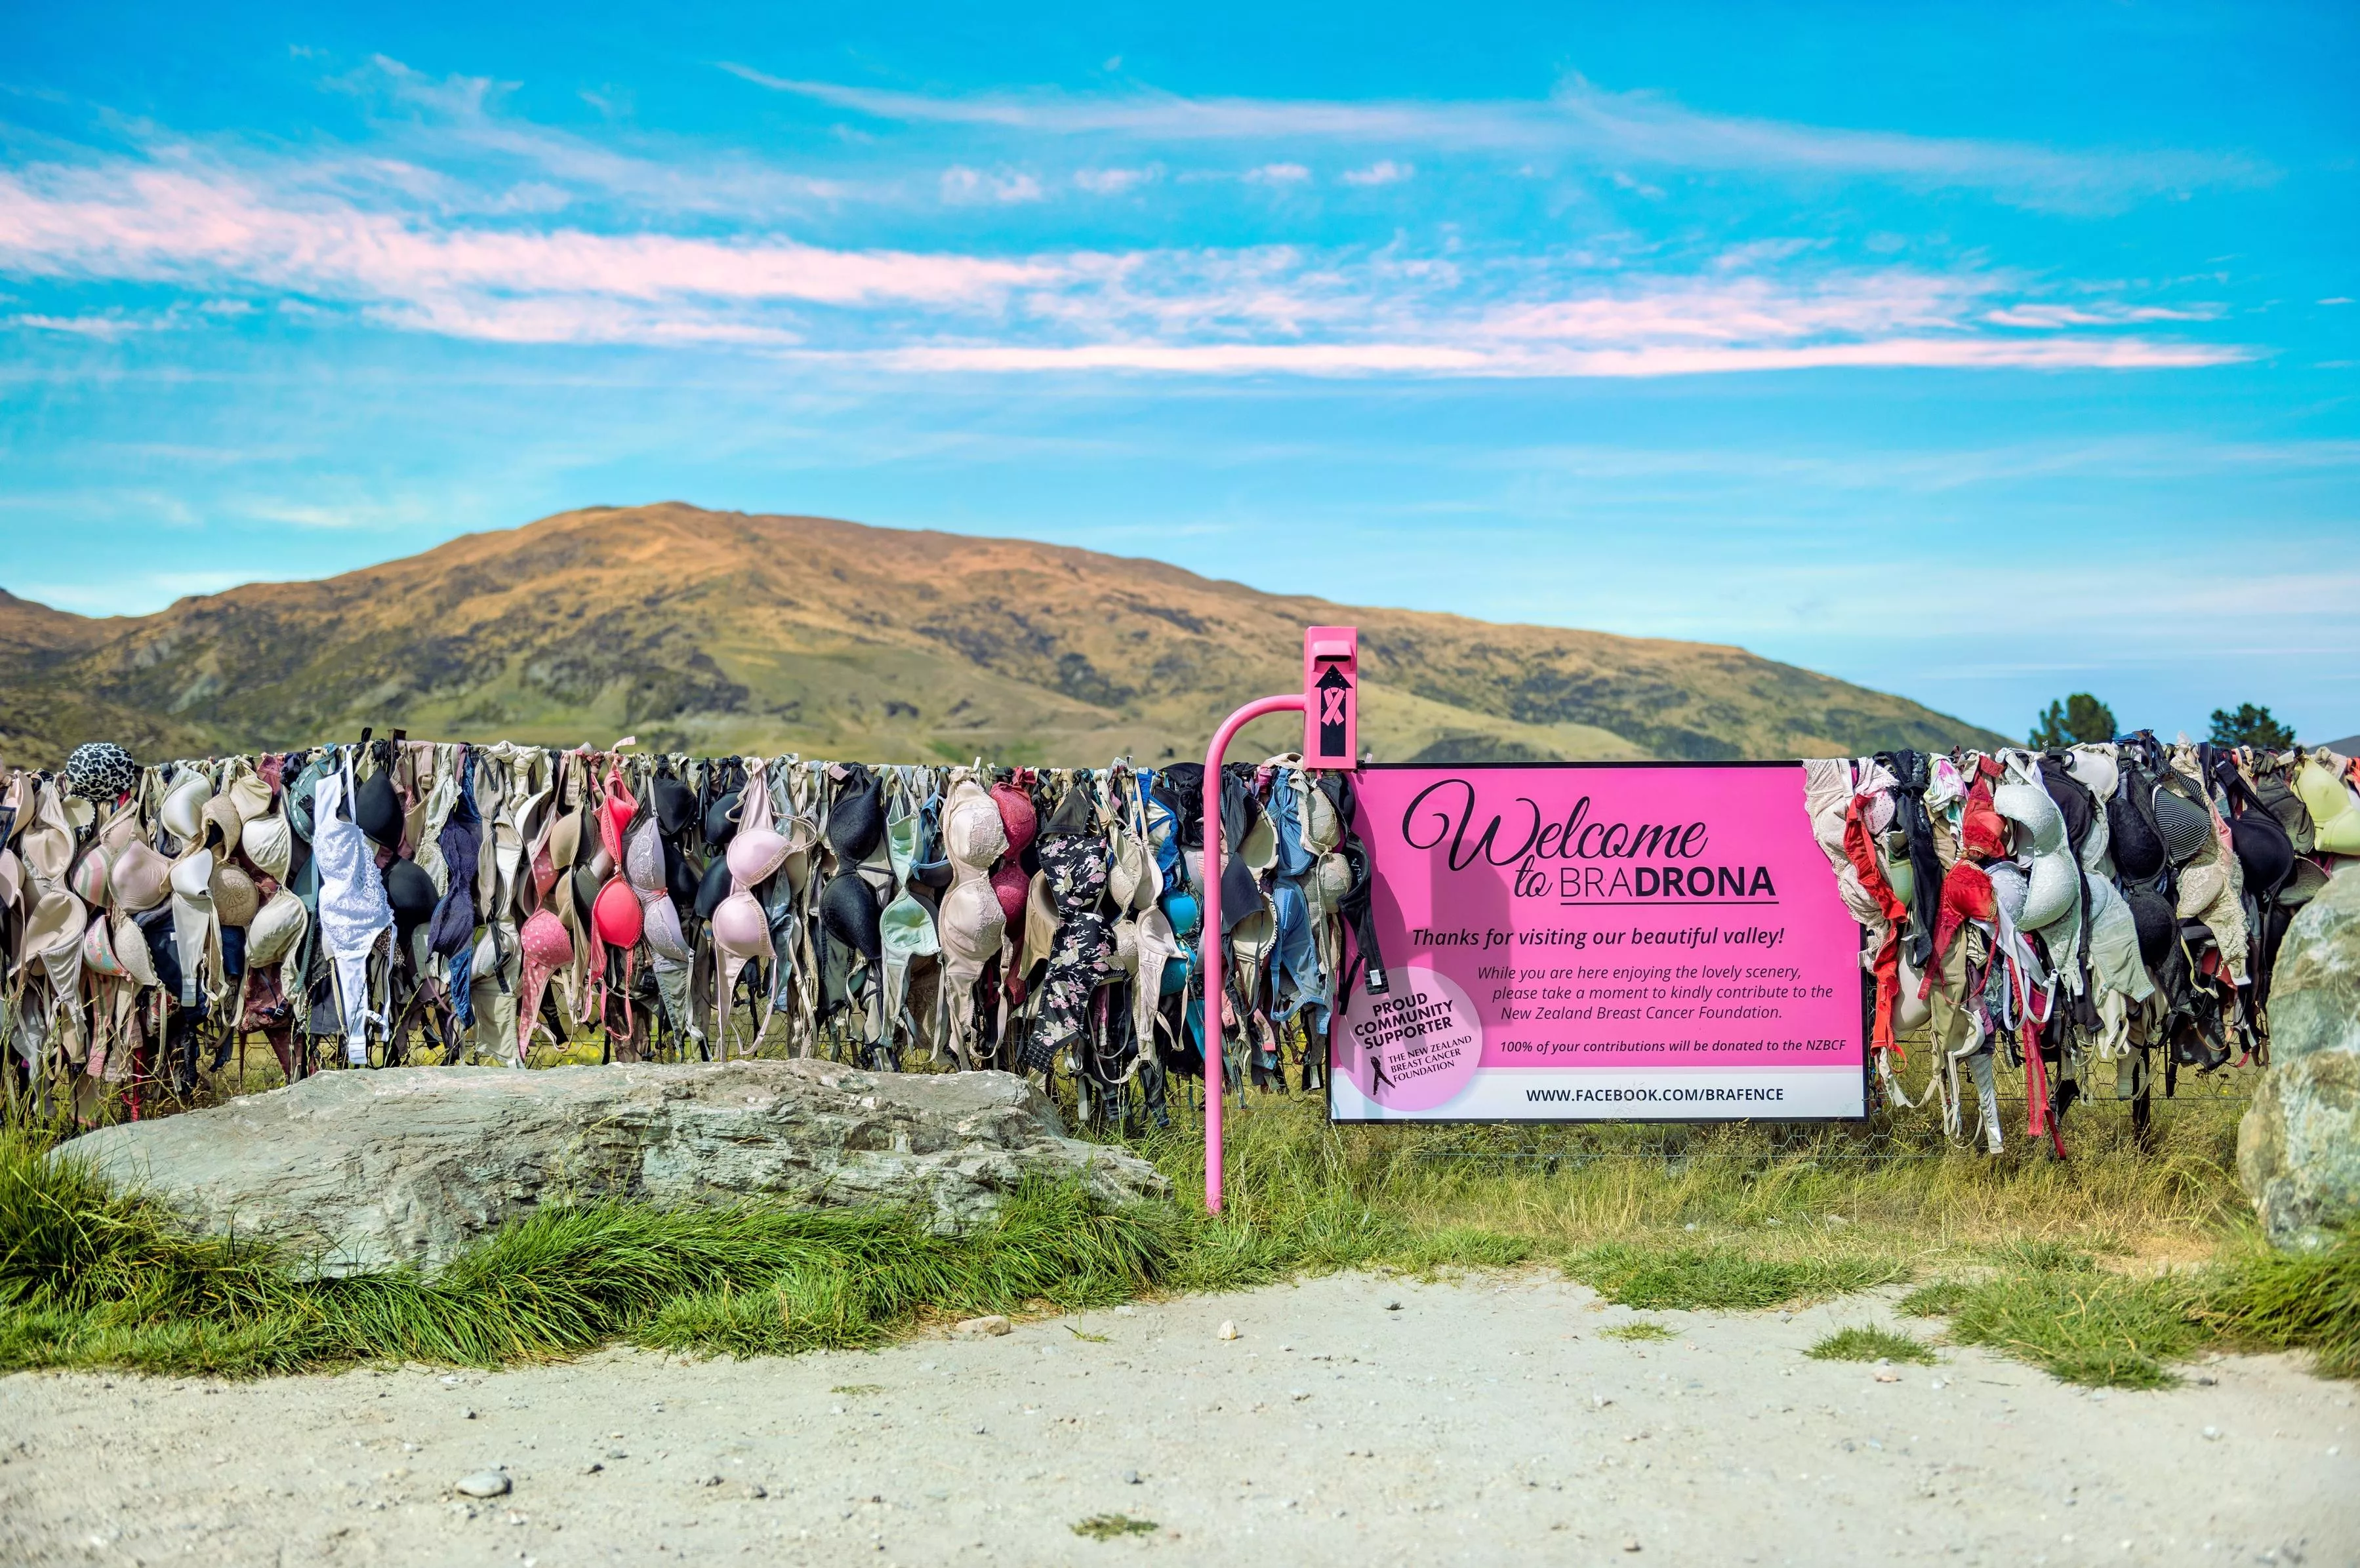 Cardrona Bra Fence in New Zealand, Australia and Oceania | Architecture - Rated 3.4